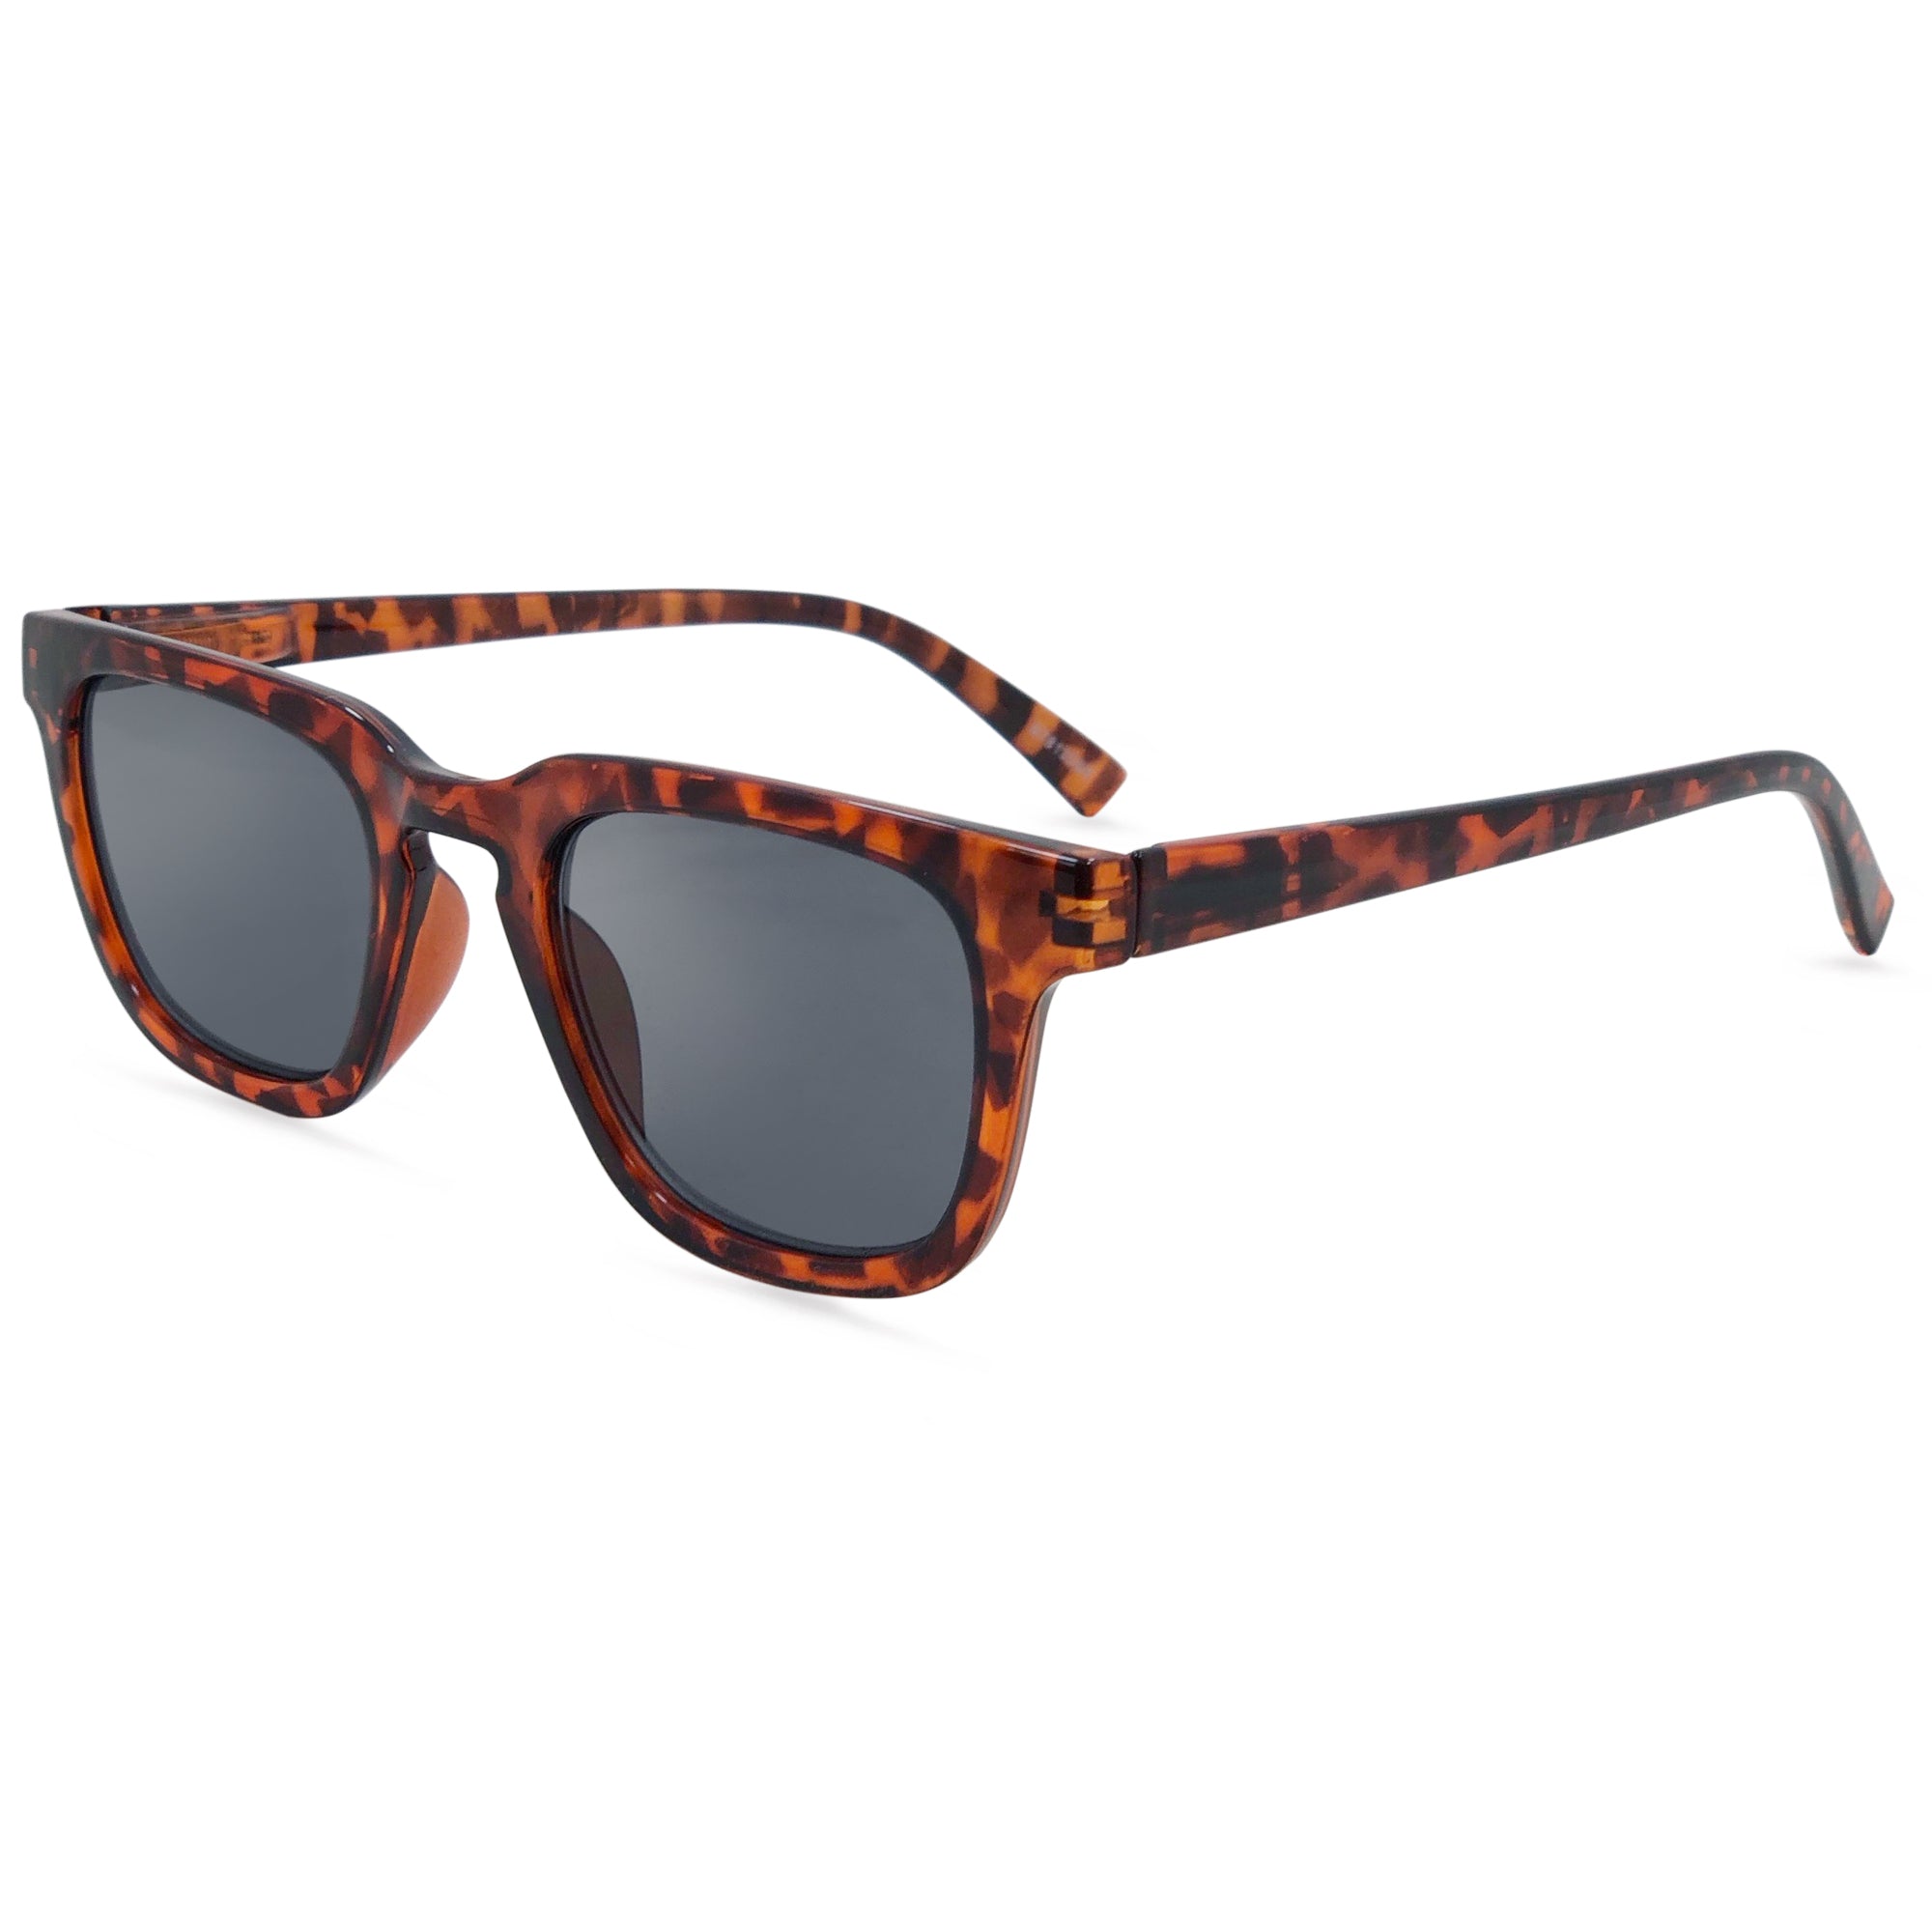 Nordy Classic Full Reader Sunglasses. Not Bifocals – In Style Eyes